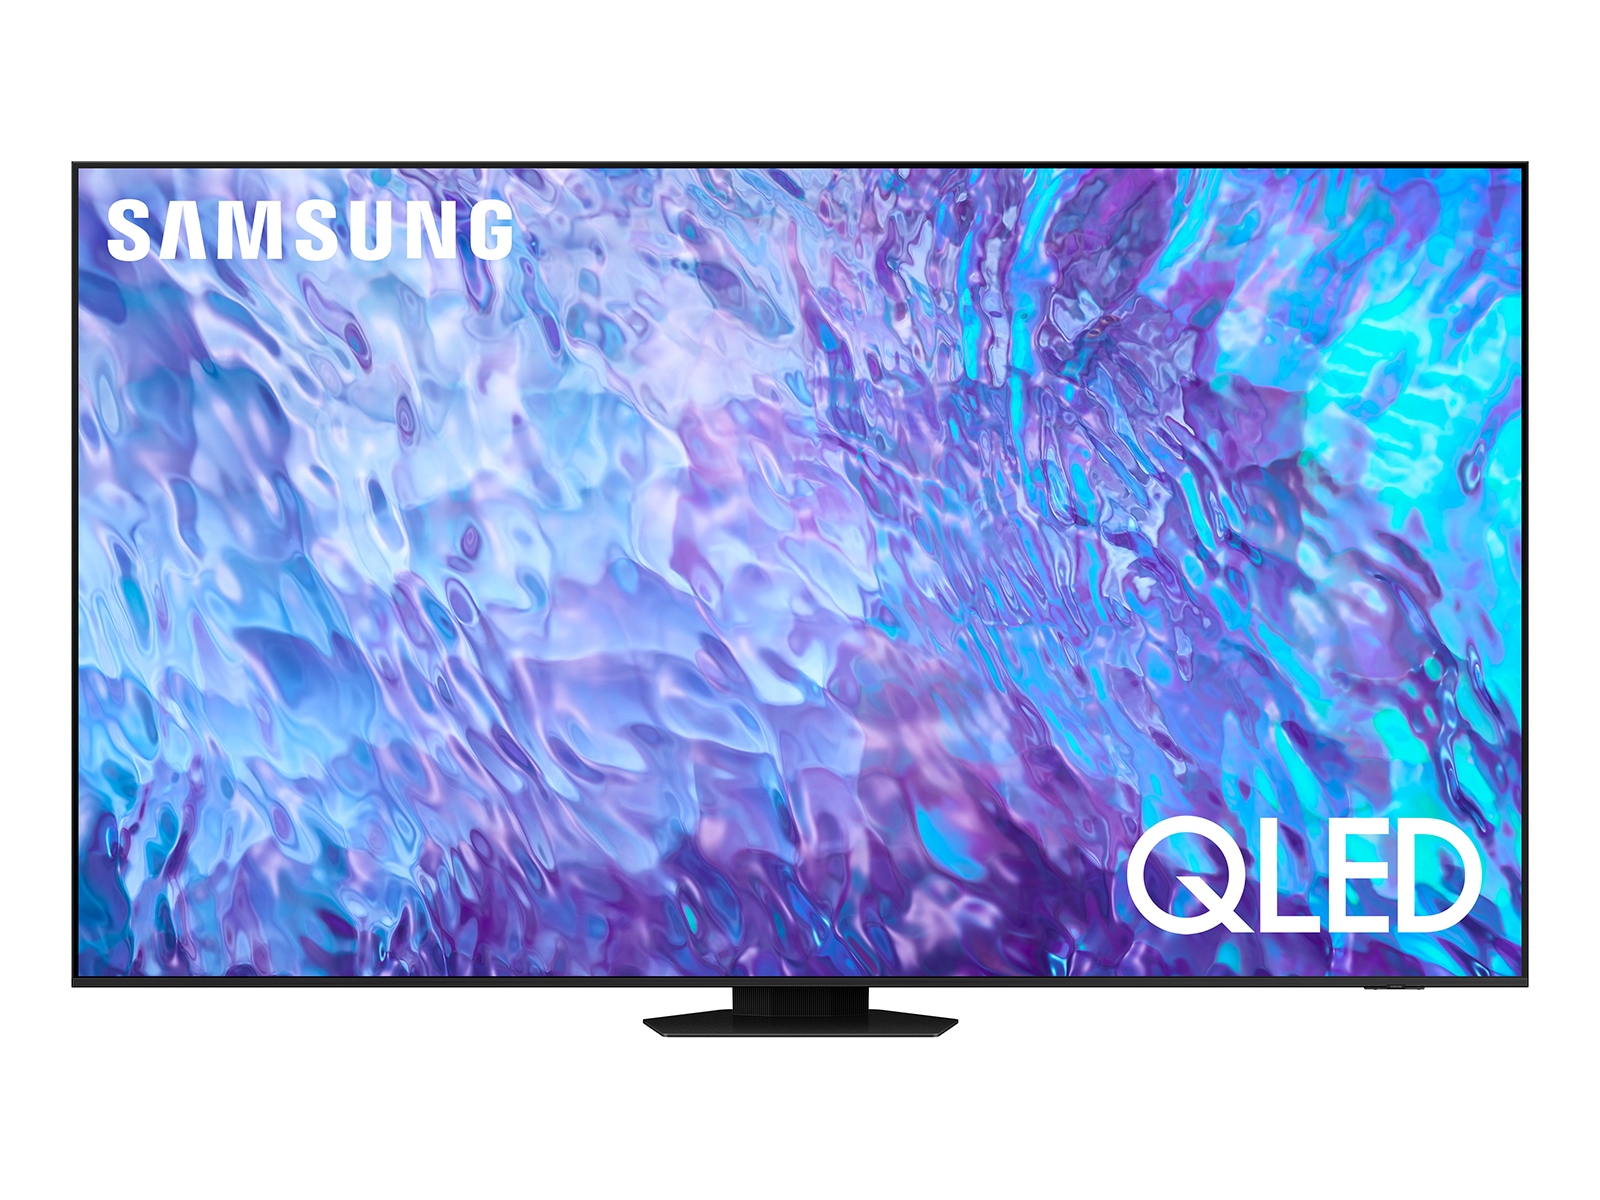 Samsung 85-inch 8K Neo QLED TV quick review: Premium TV for pro users -  India Today